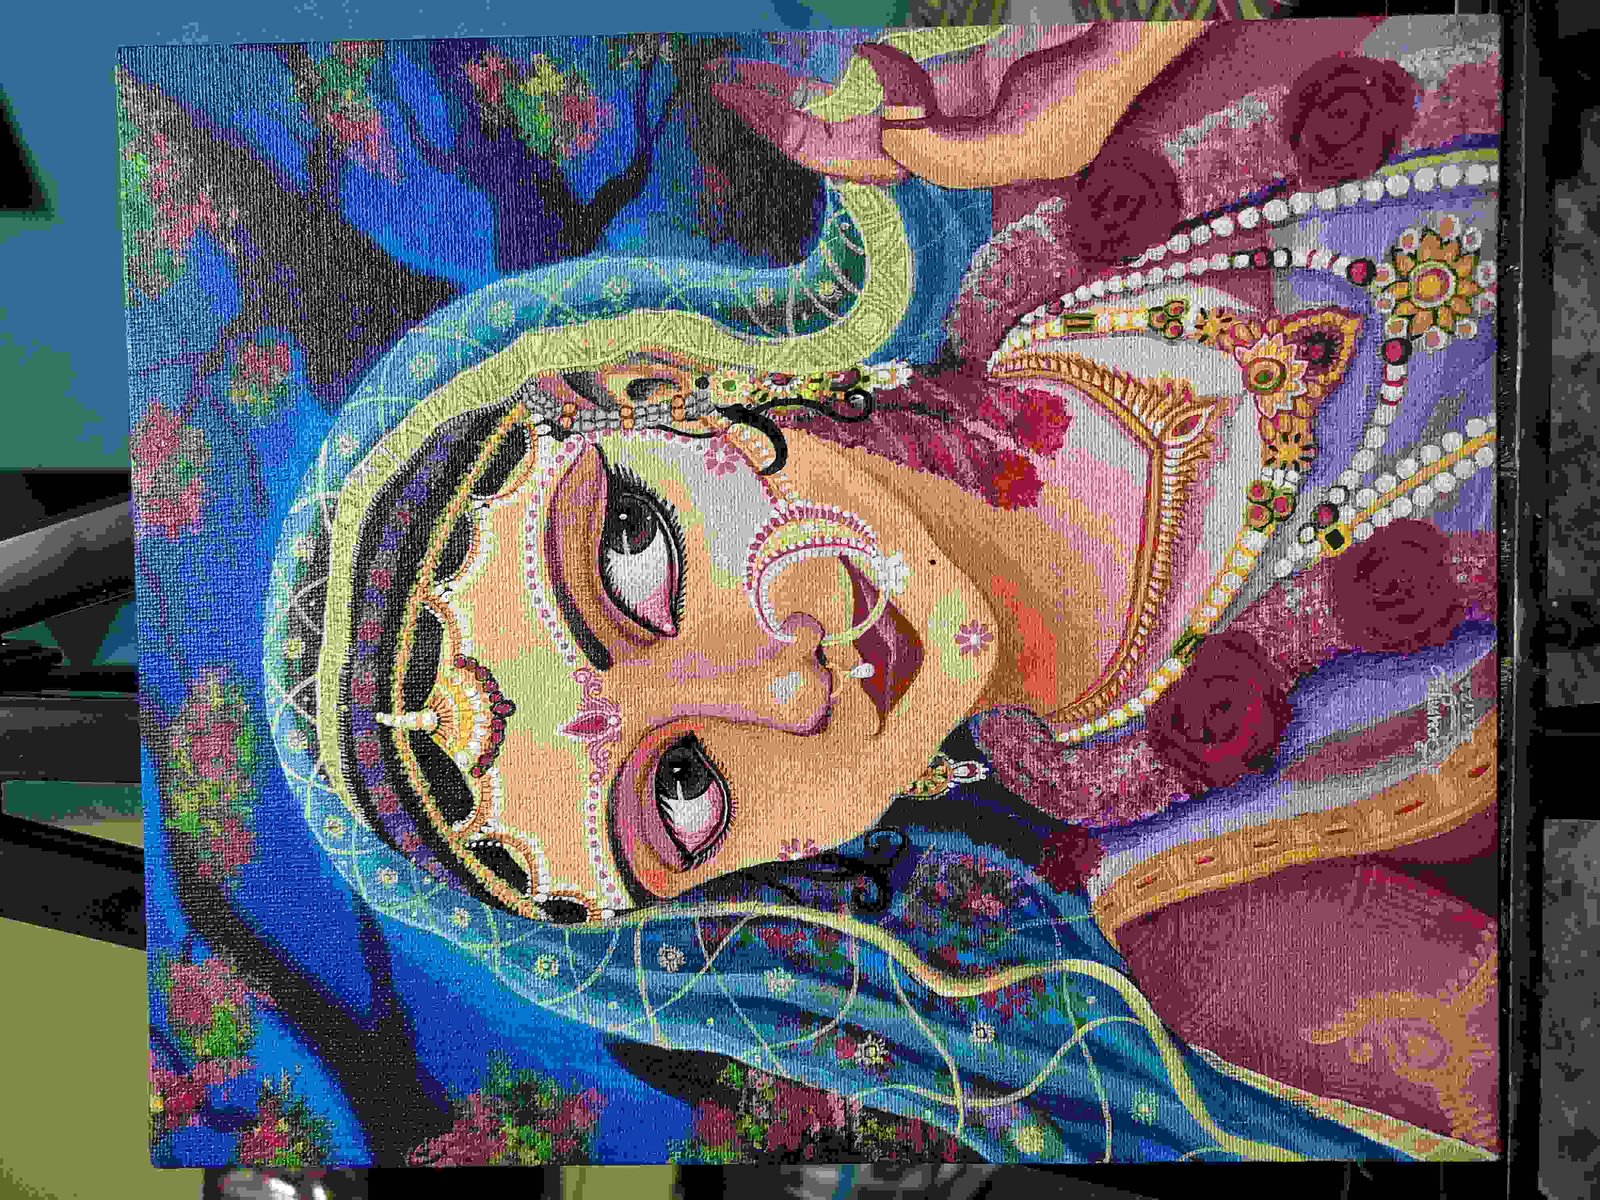 Radha rani sketch | Step by step | Realtime Video for beginners - YouTube